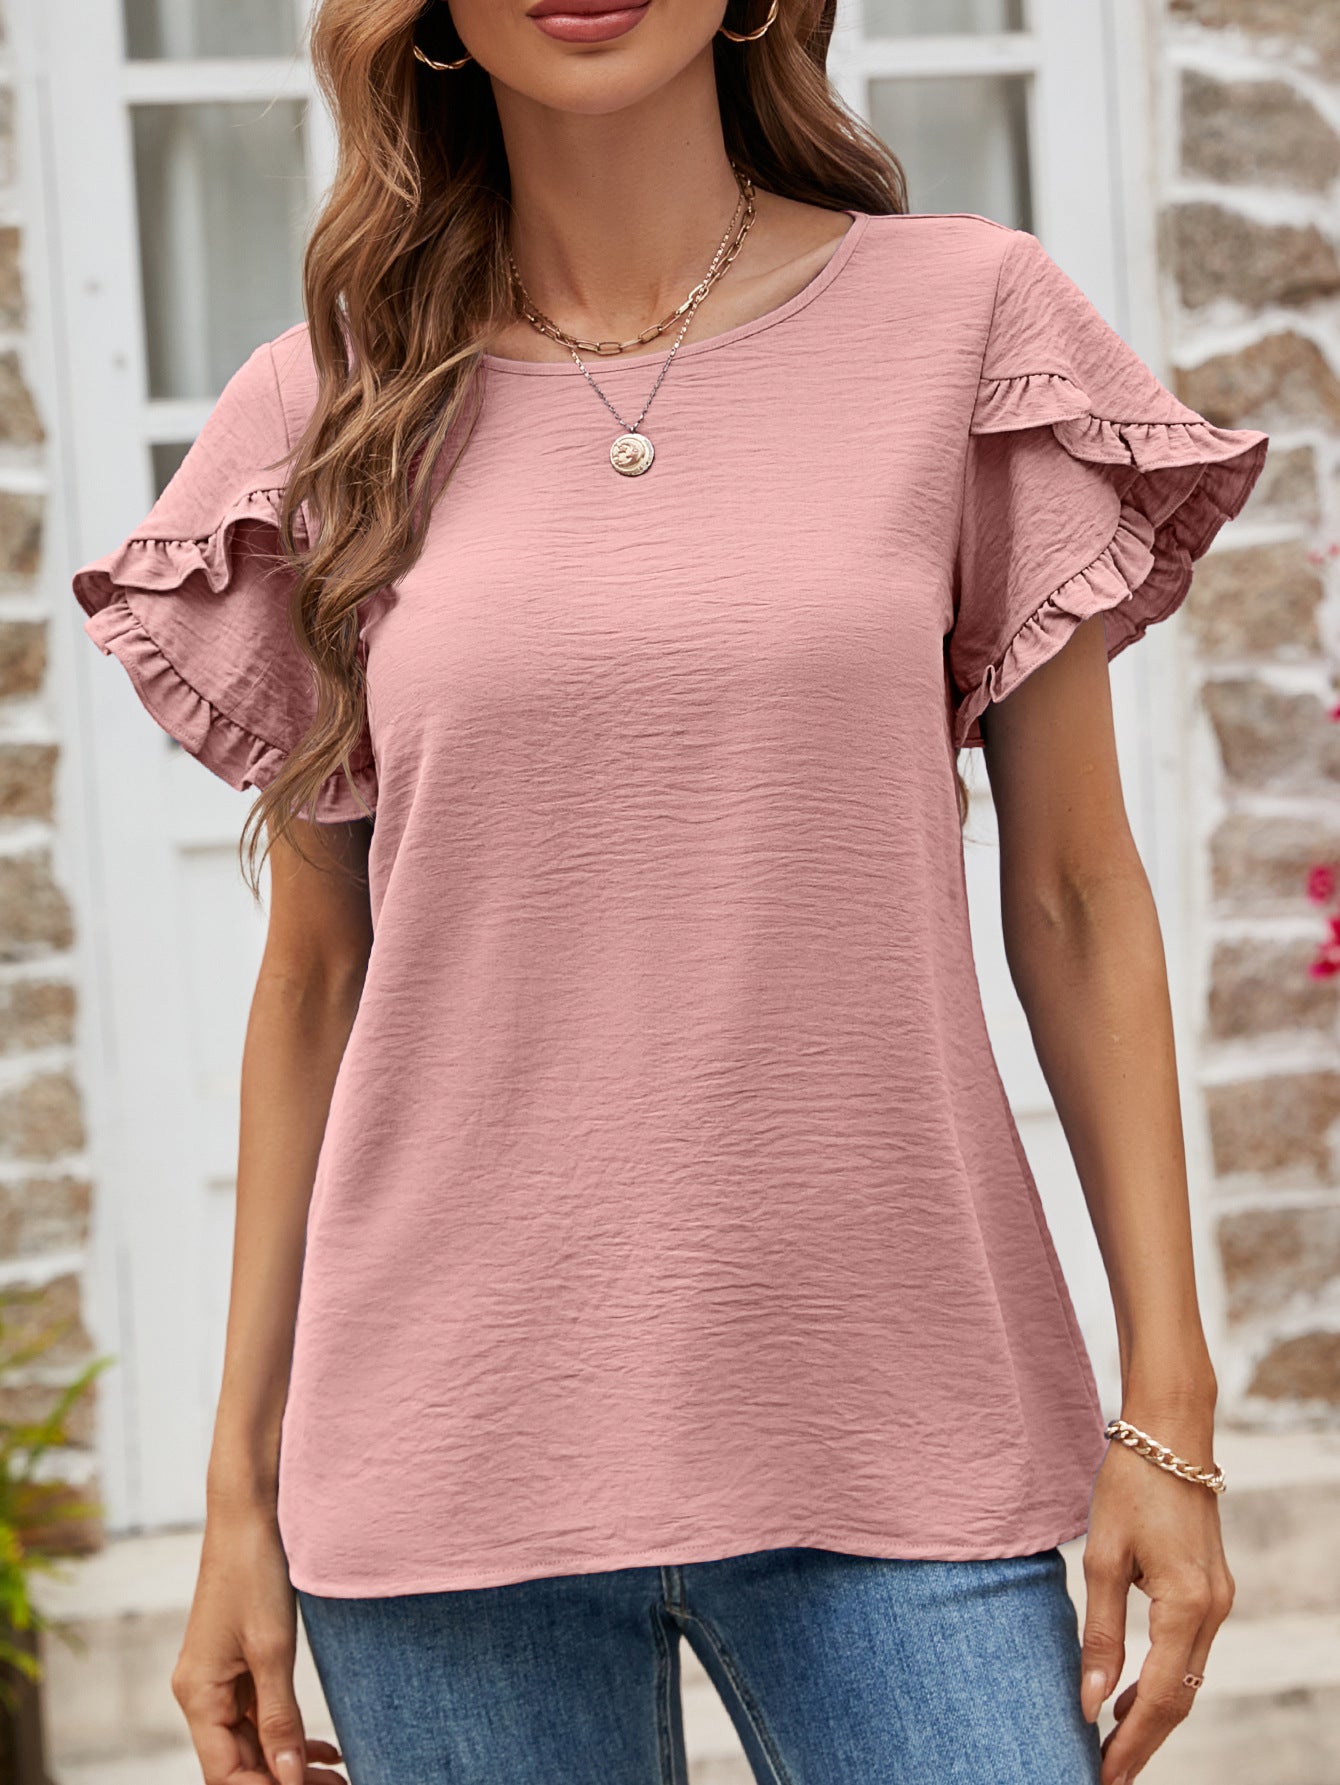 Textured Petal Sleeve Round Neck Tee - Kawaii Stop - Casual-Chic Style, Changeable, Everyday Wear, Imported Fashion, Petal Sleeve Detail, Round Neck Tee, Ship From Overseas, Soft Polyester, Stylish and Comfortable, T-Shirt, T-Shirts, Tee, Textured Fabric, Women's Clothing, Women's Top